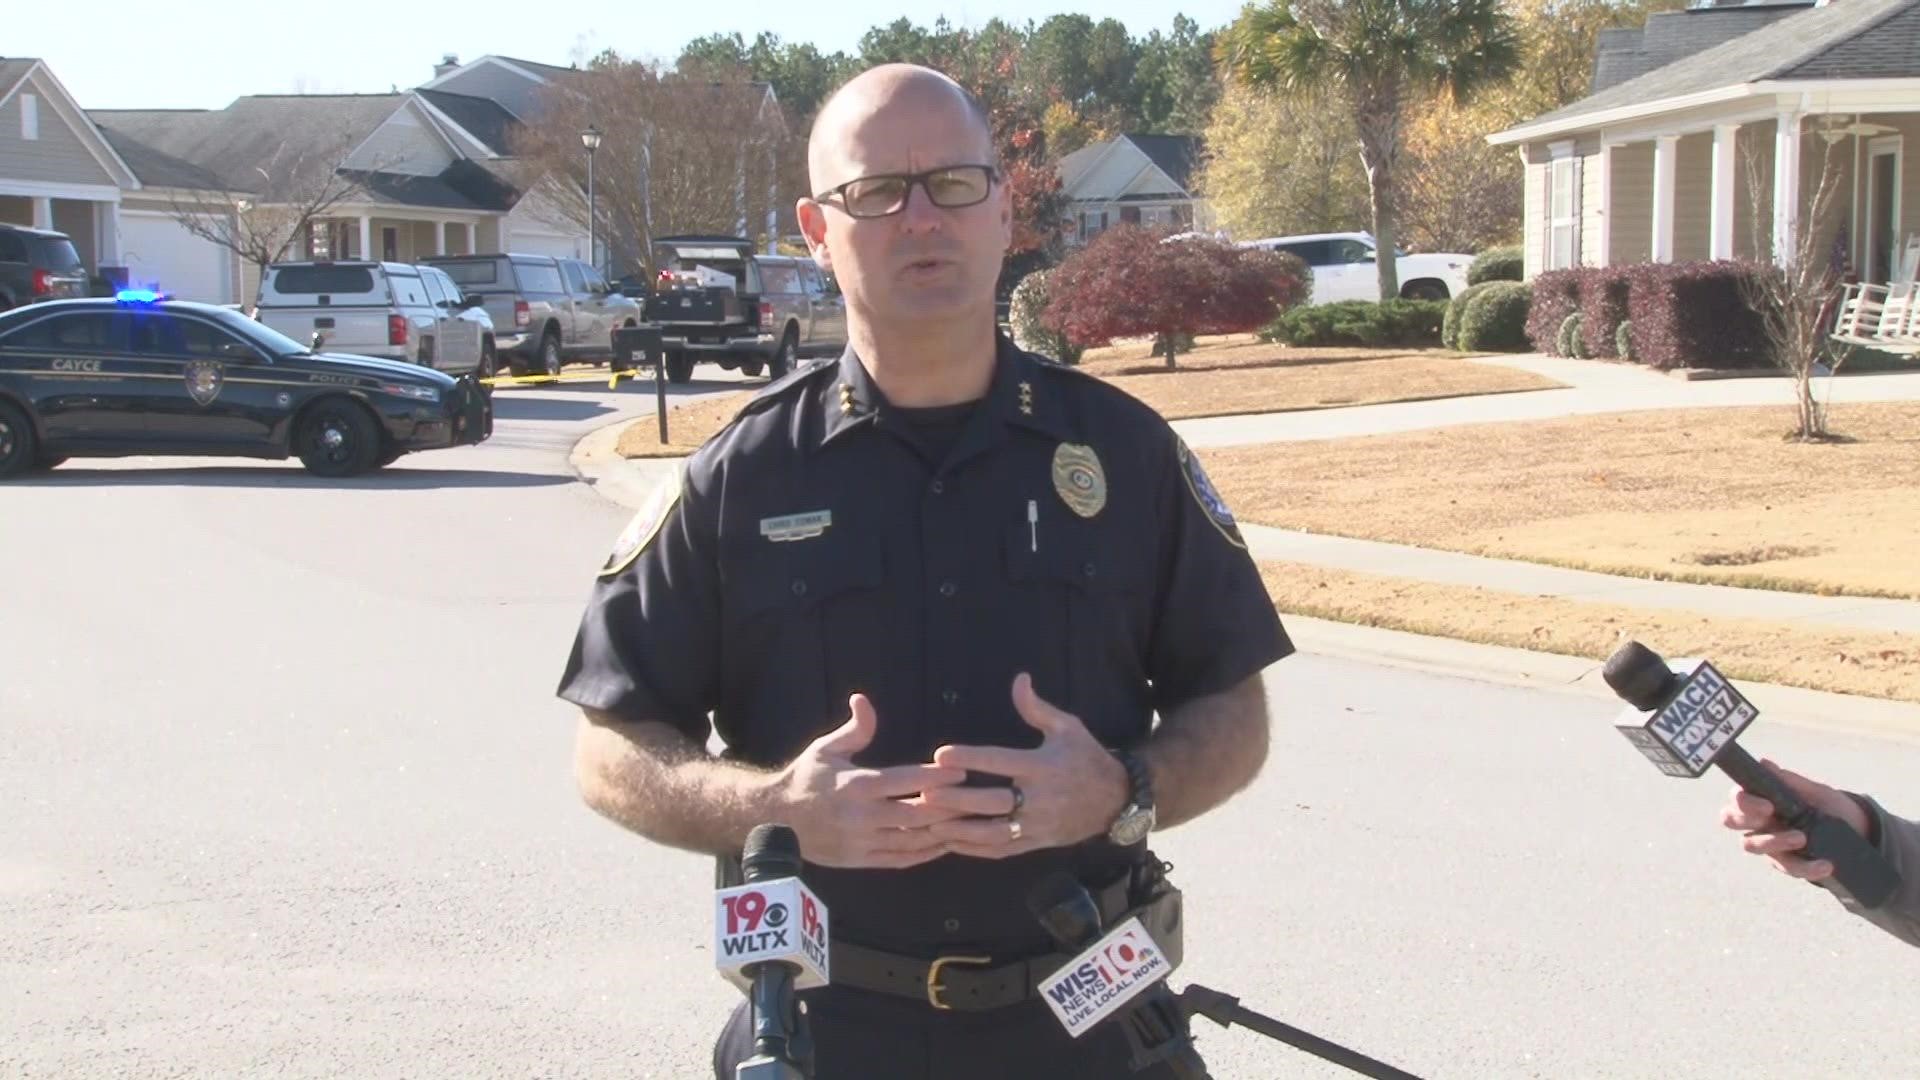 Cayce Police Chief Chris Cowan says officers are investigating after a body was found outside a home on Tuesday.